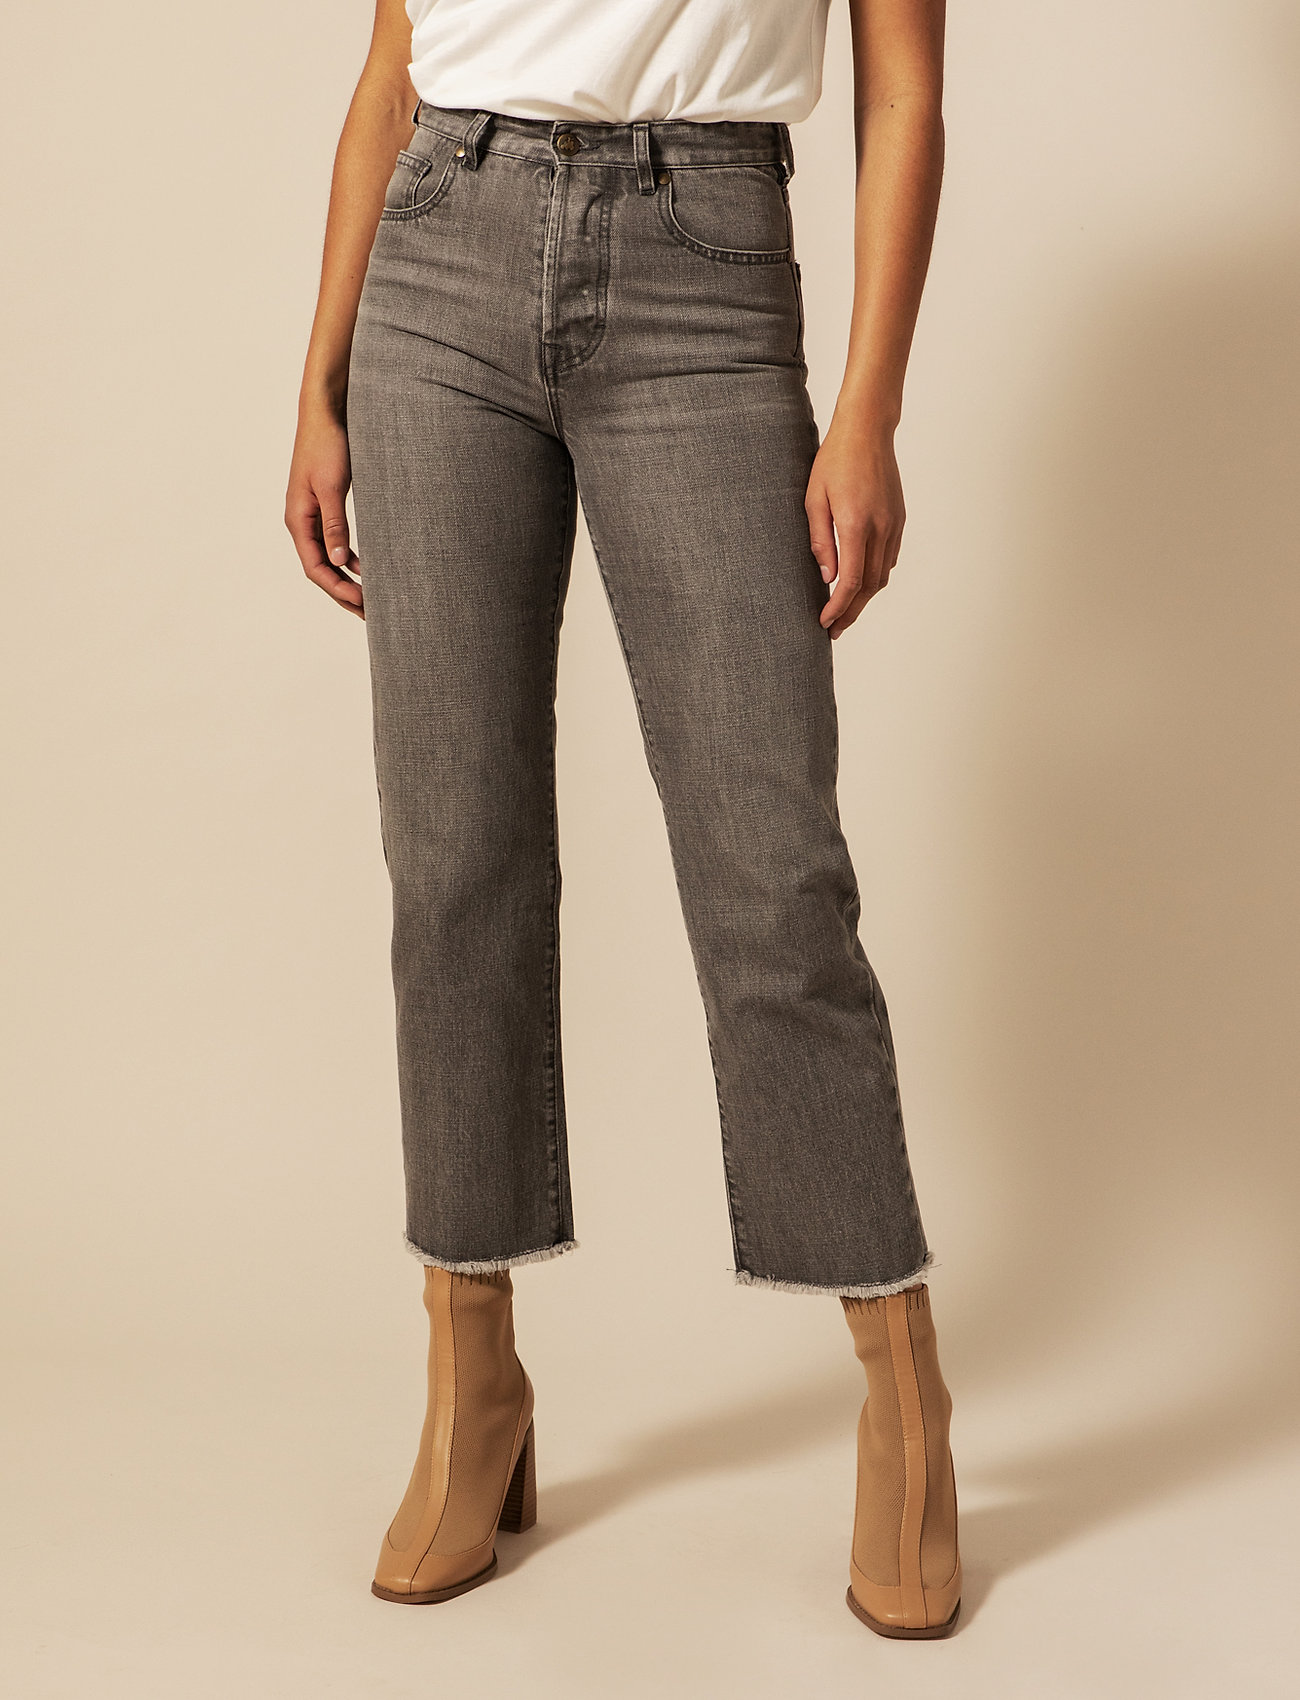 By Malina - Alexa high-rise denim jeans - straight jeans - washed grey - 0